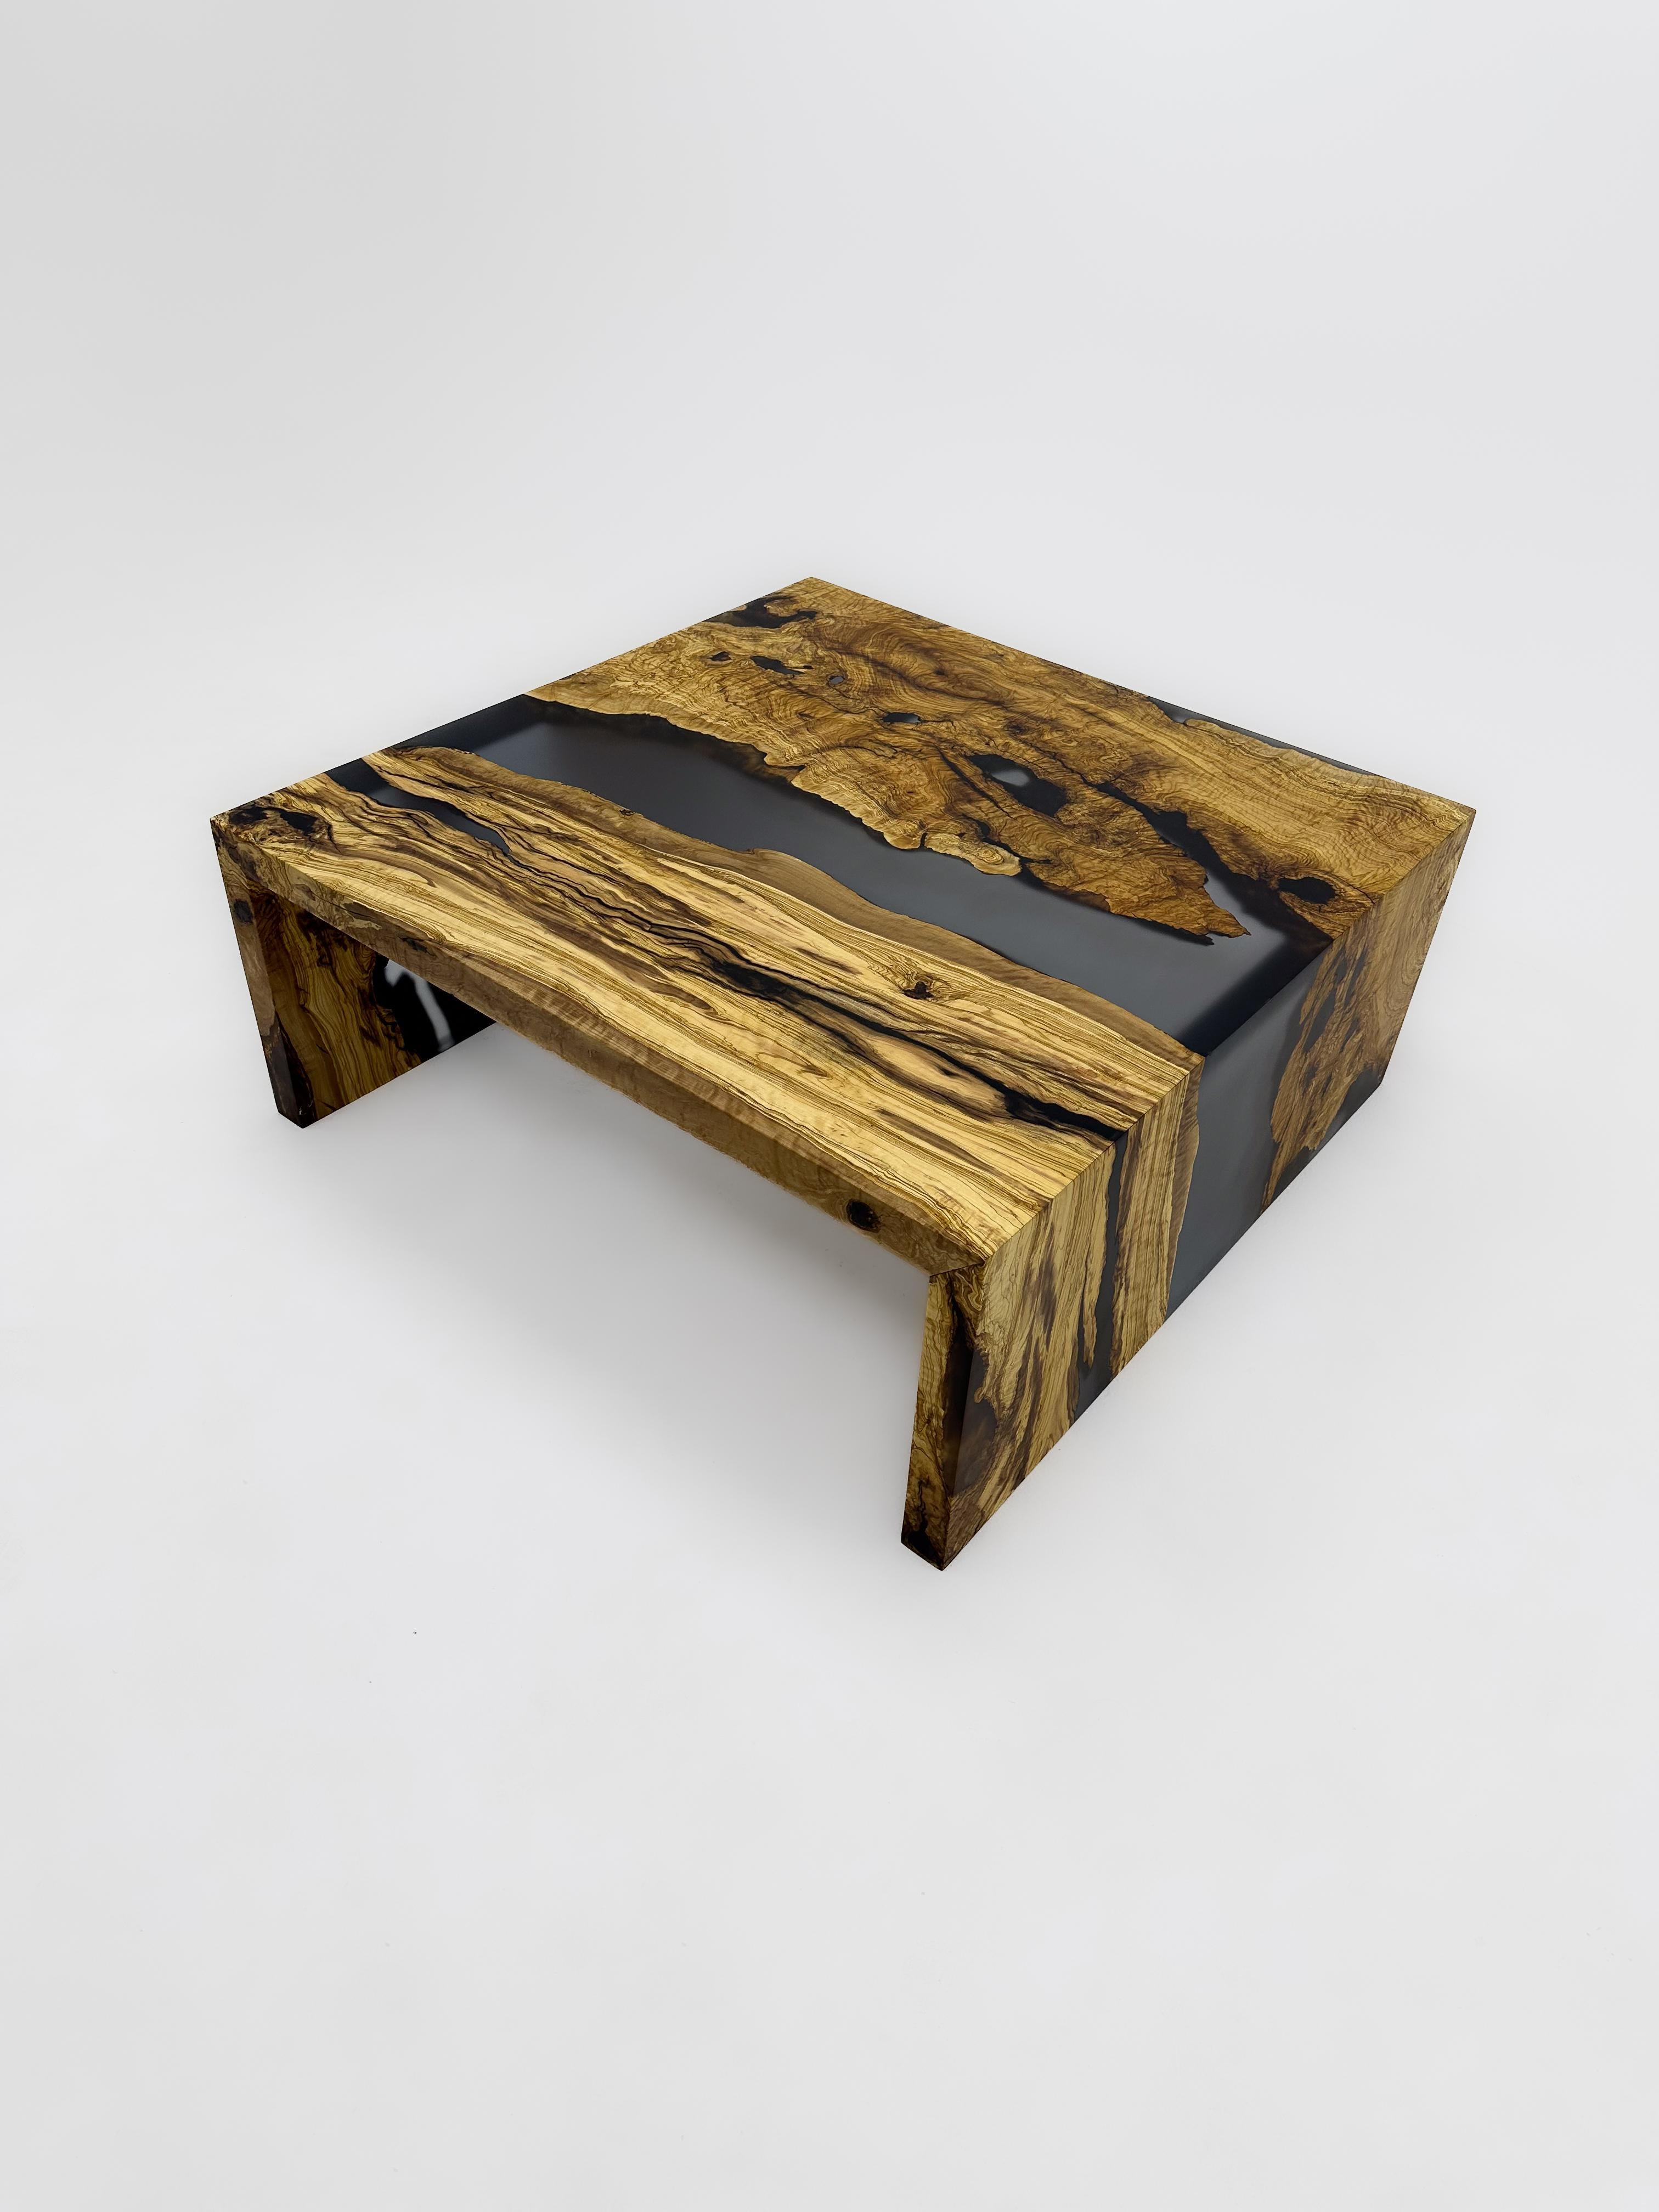 Turkish Waterfall Epoxy Resin Coffee Table With Ancient Olive Wood For Sale